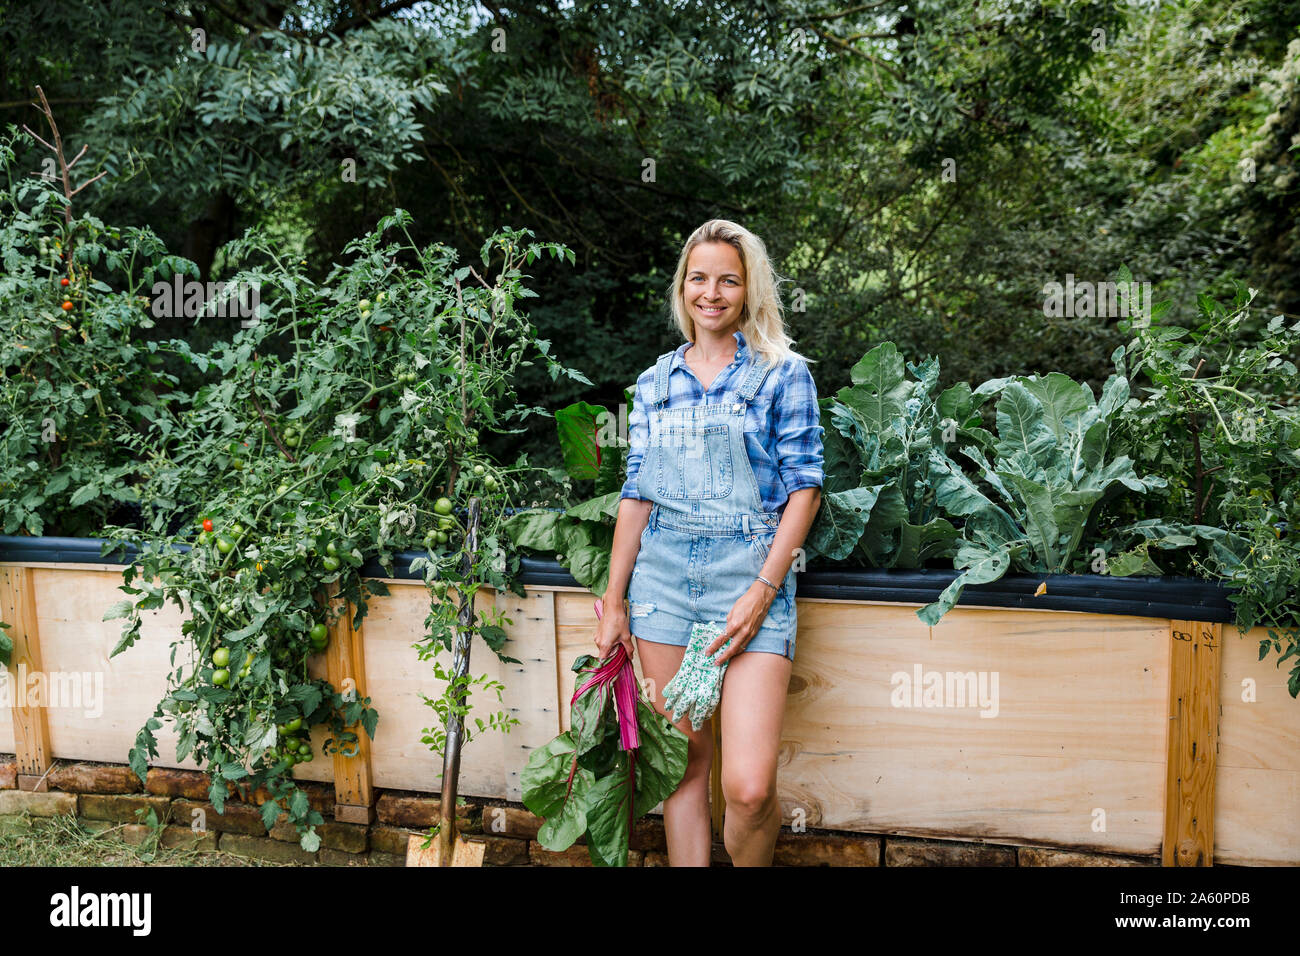 Blond woman harvesting mangold from her raised bed in her own garden Stock Photo